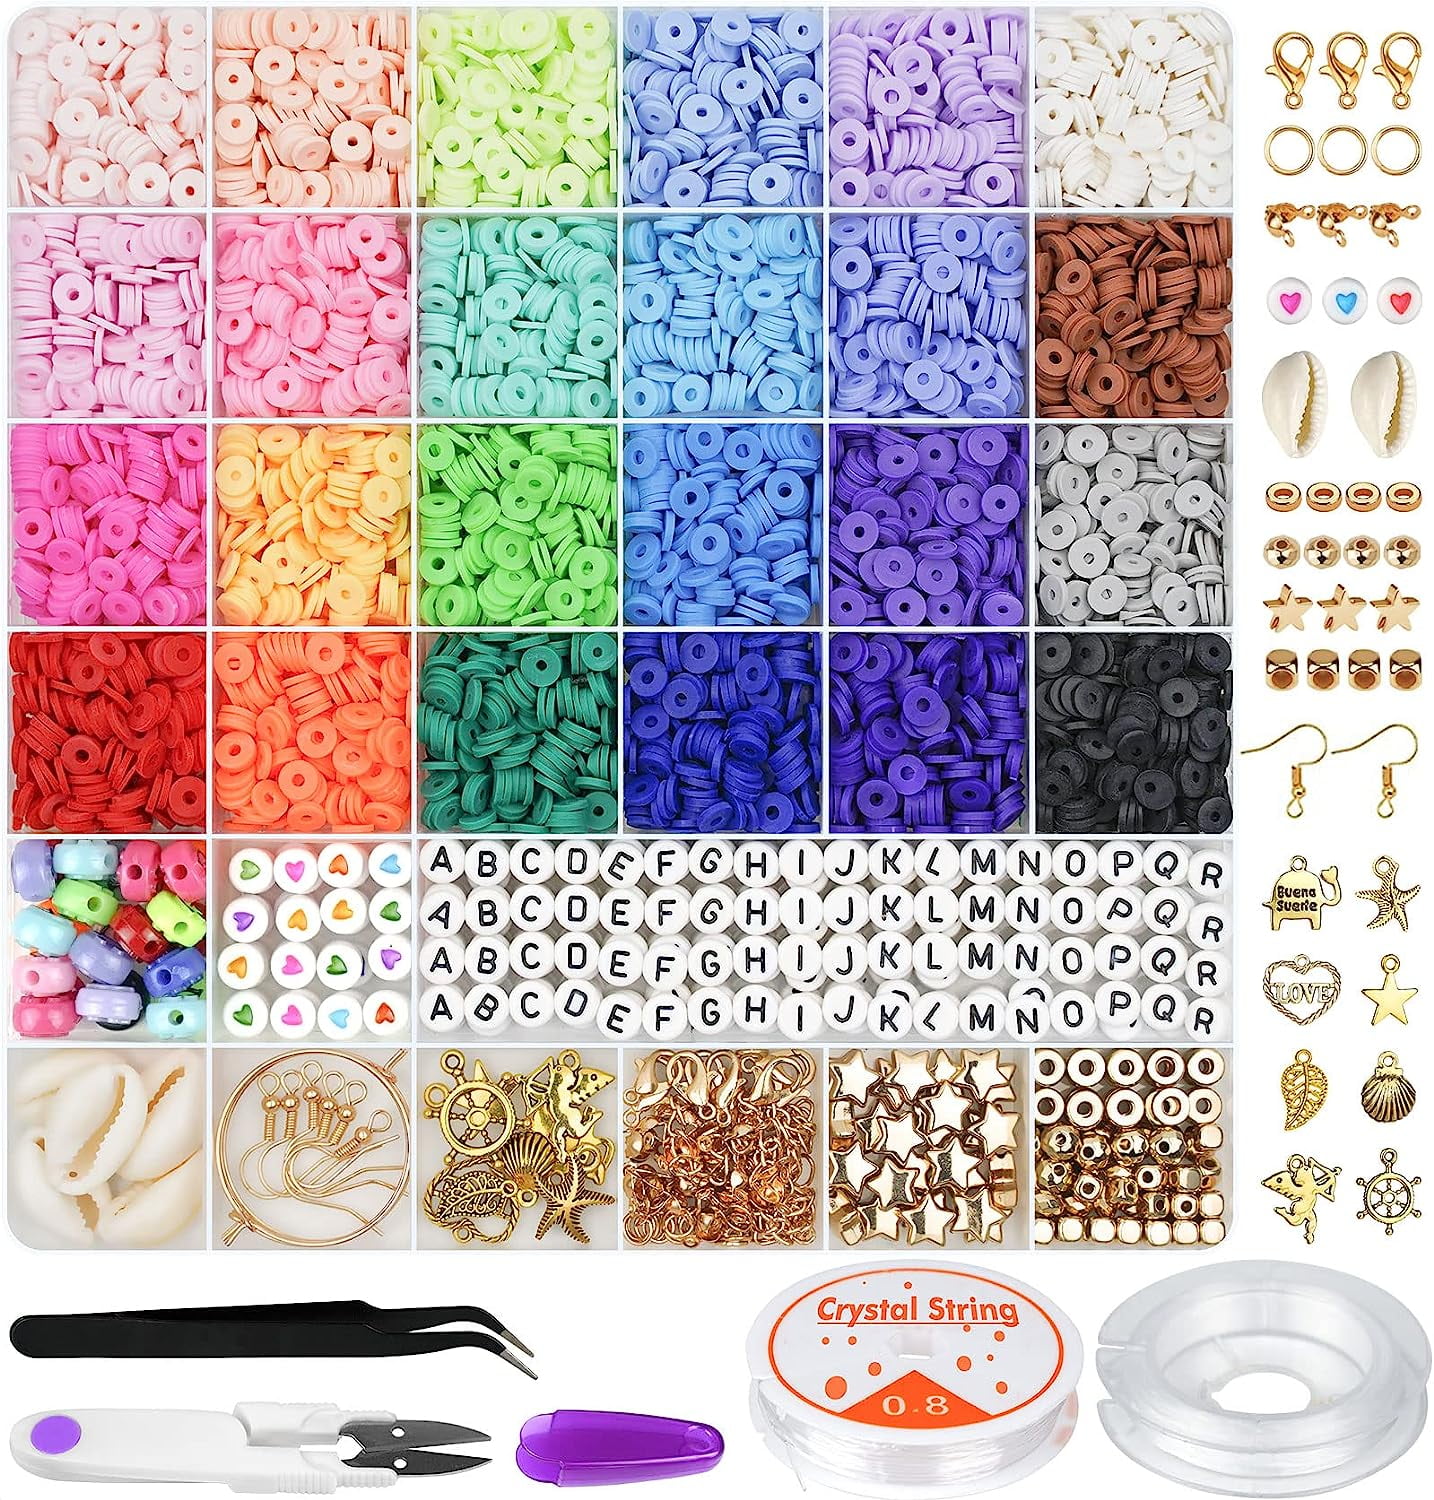 QUEFE 5000pcs Clay Heishi Beads for Bracelet Jewelry Making, Polymer Flat Round Clay Beads Kit with 240pcs Letter Beads, Pendant Charms and Elastic